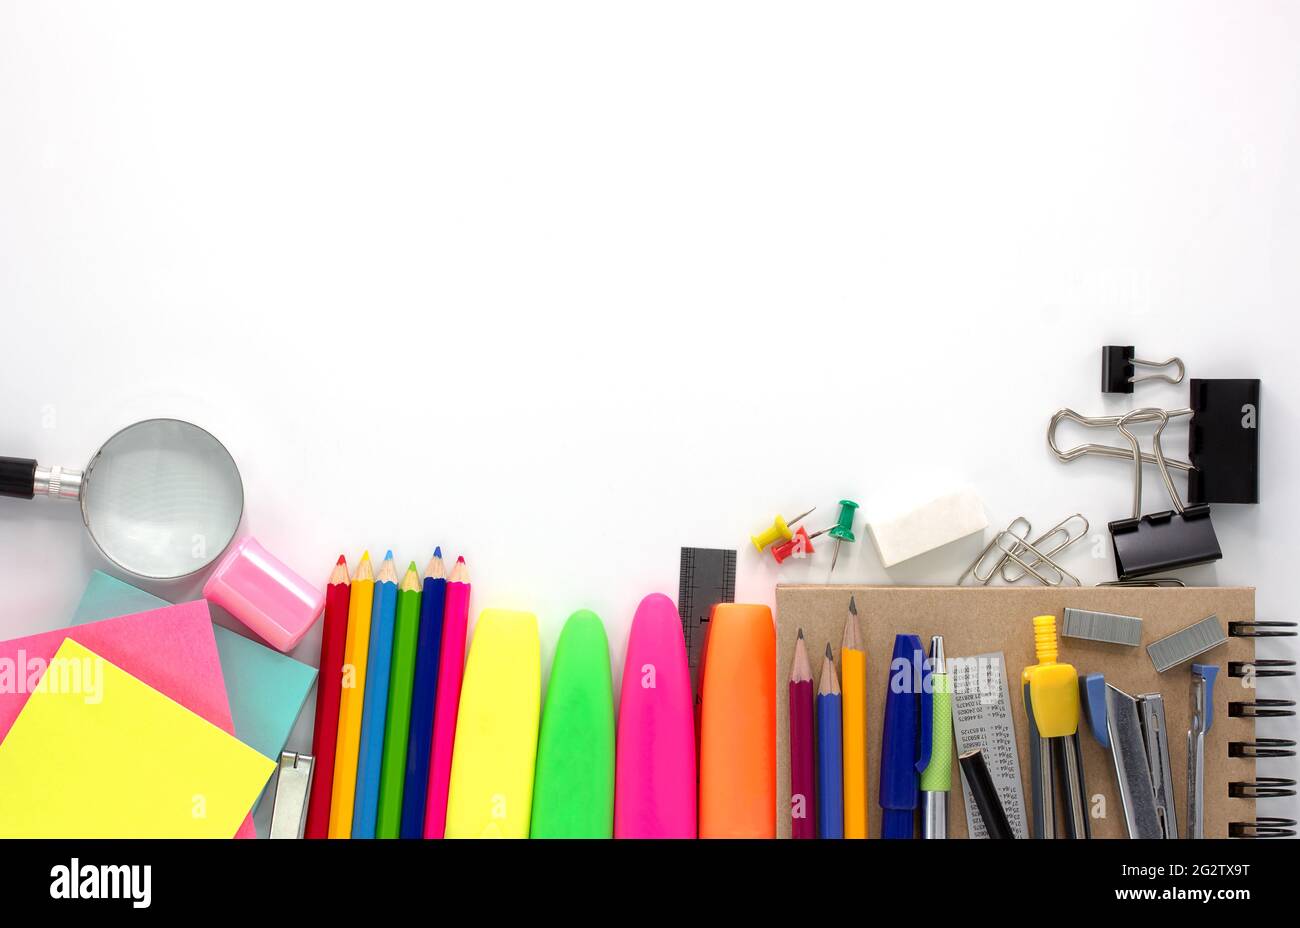 Large Assortment Of Office Supplies On White Backdrop Stock Photo -  Download Image Now - iStock